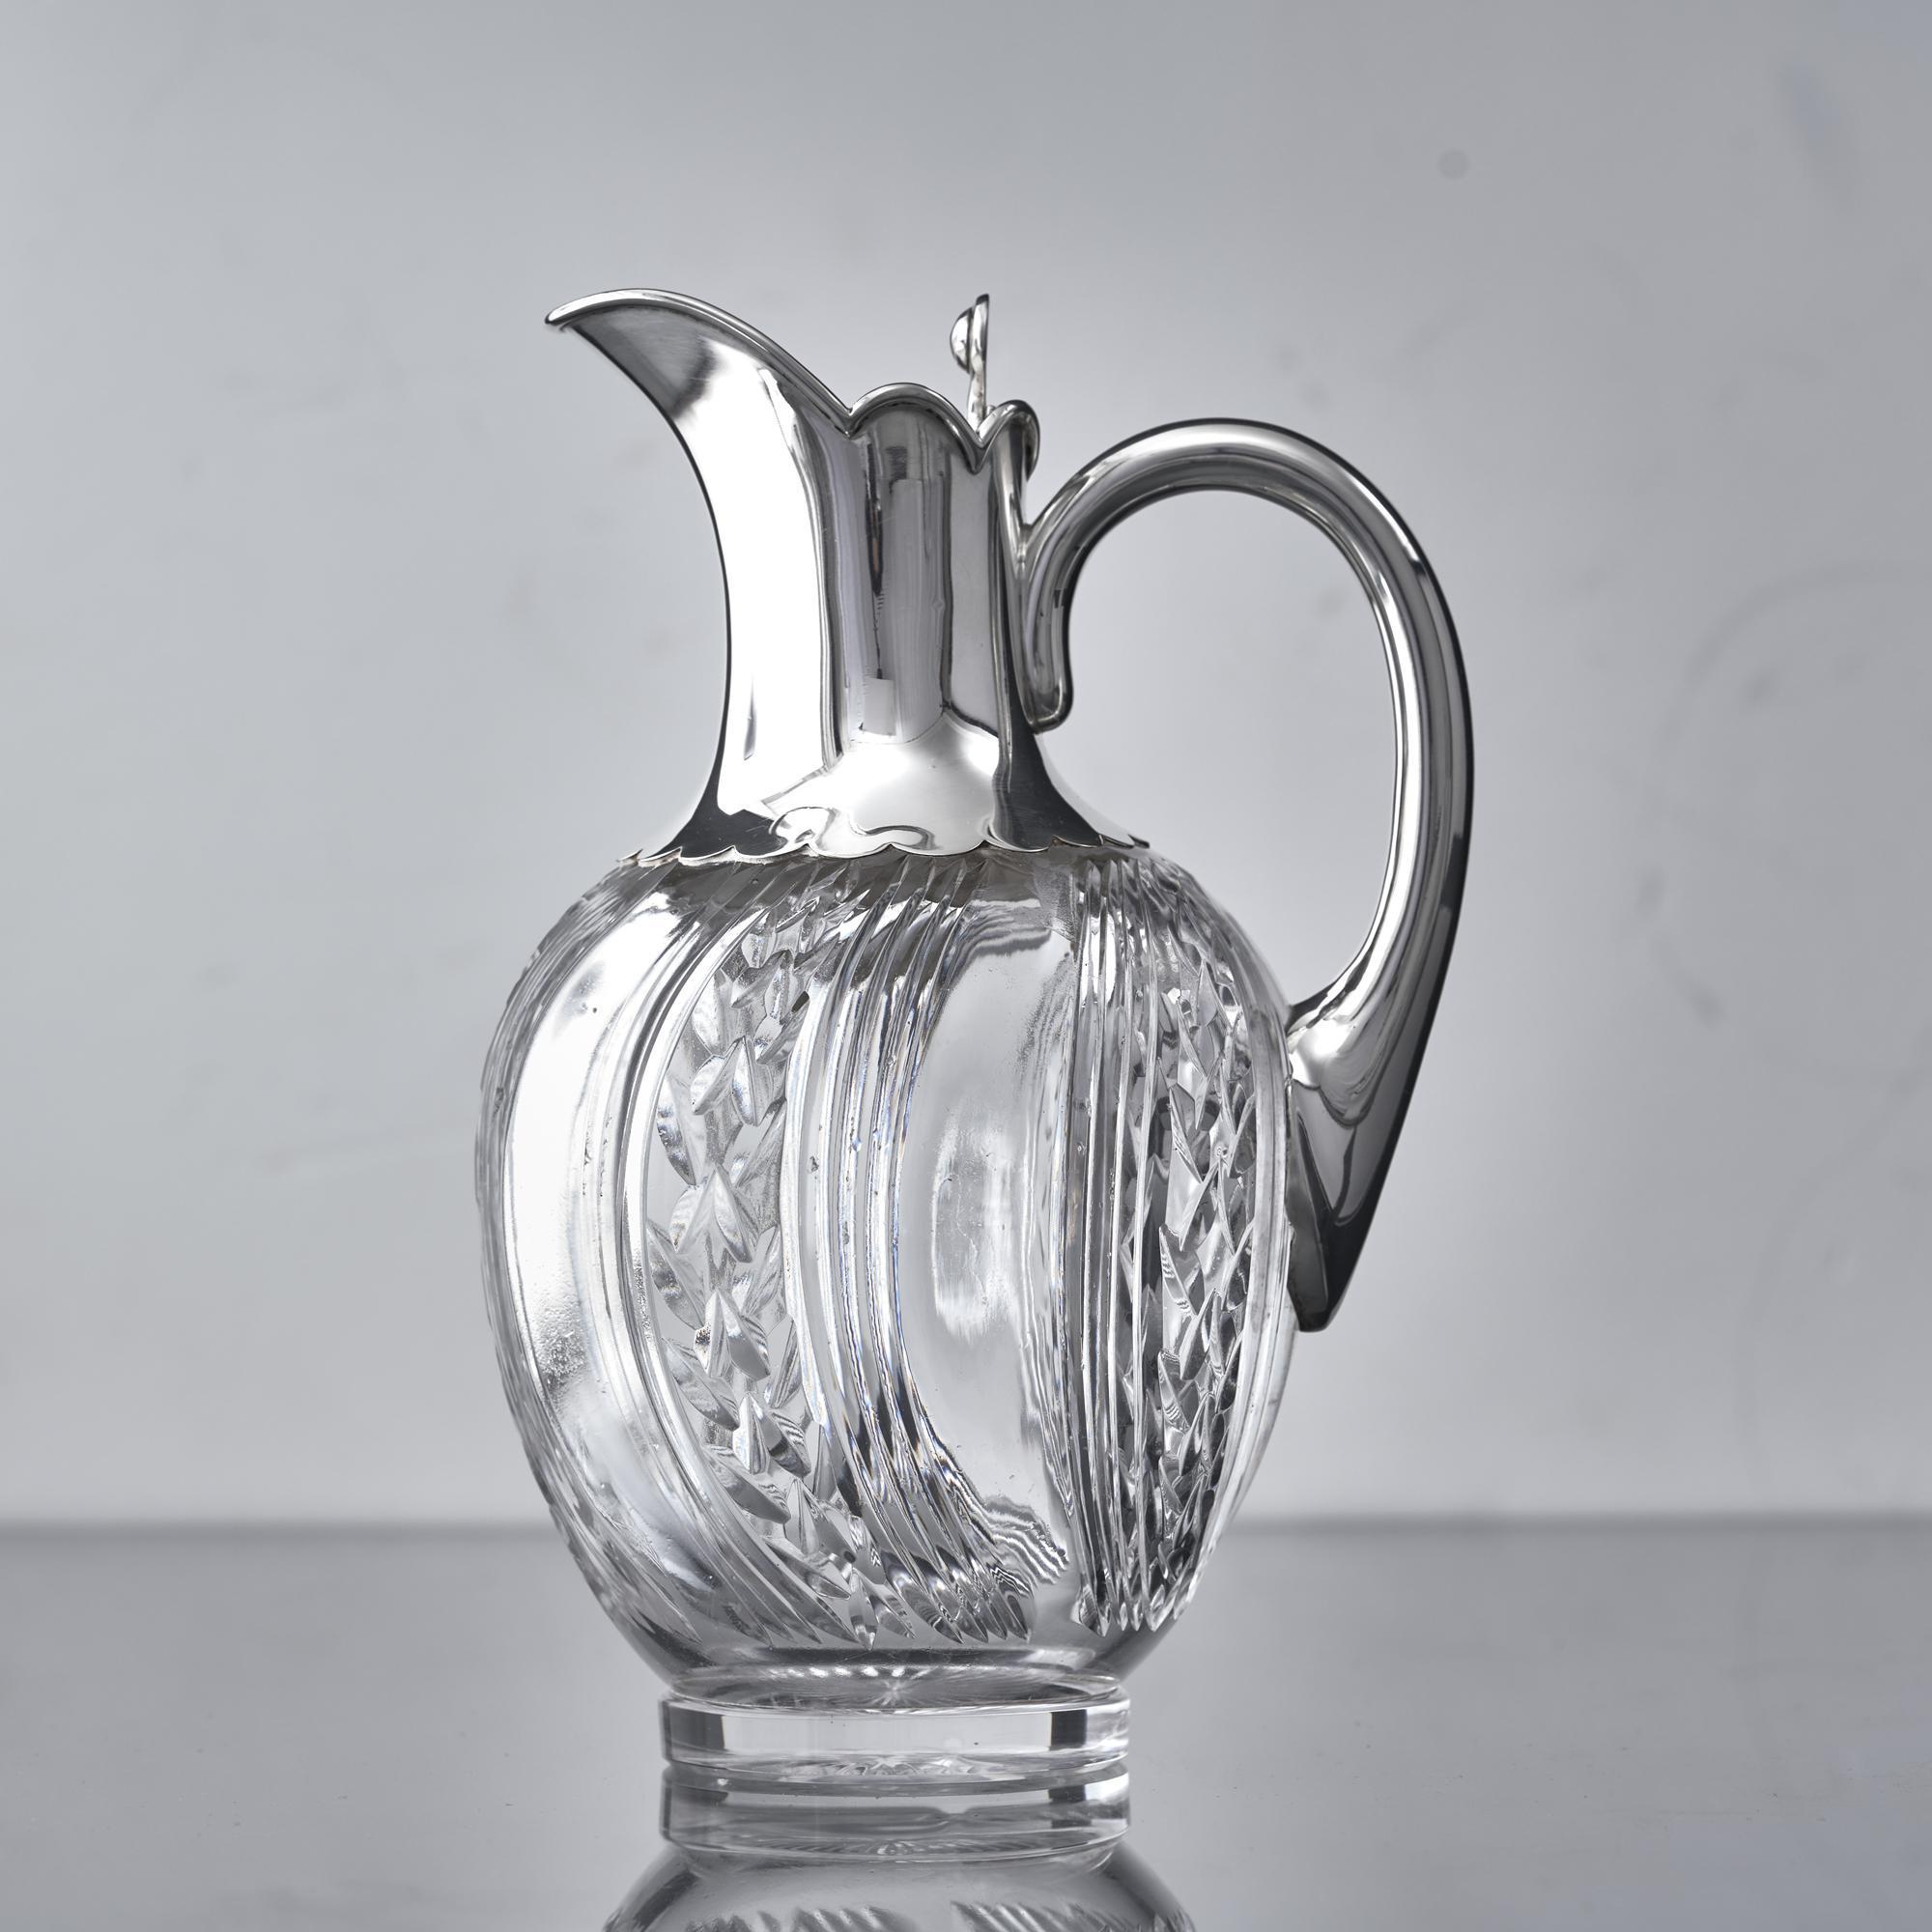 A pretty antique wine jug with round cut-glass body and silver mounts. The swirling bands of fluting and facetting on the glass nicely complement the gentle curves and lobes on the collar. This jug has a hinged lid with cast thumbpiece for opening.